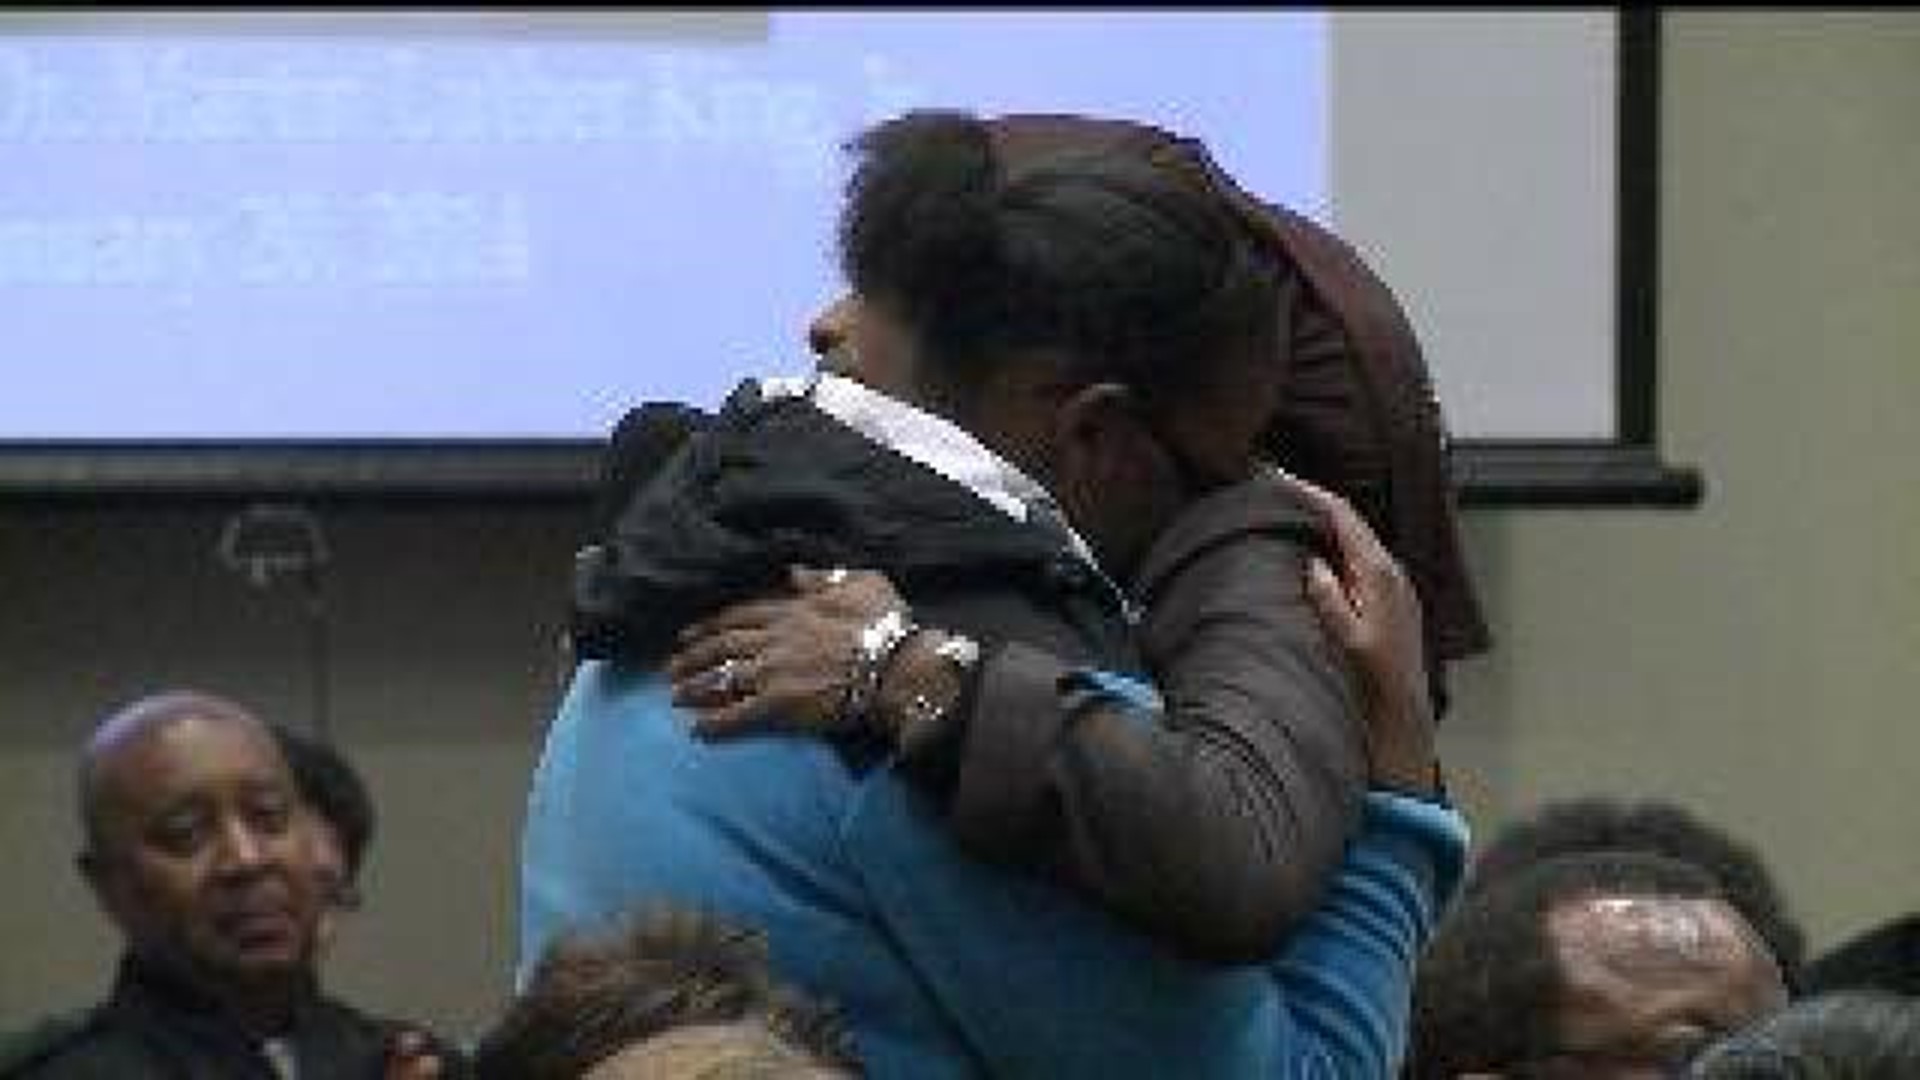 Rock Island community tackles violence through Martin Luther King Jr.